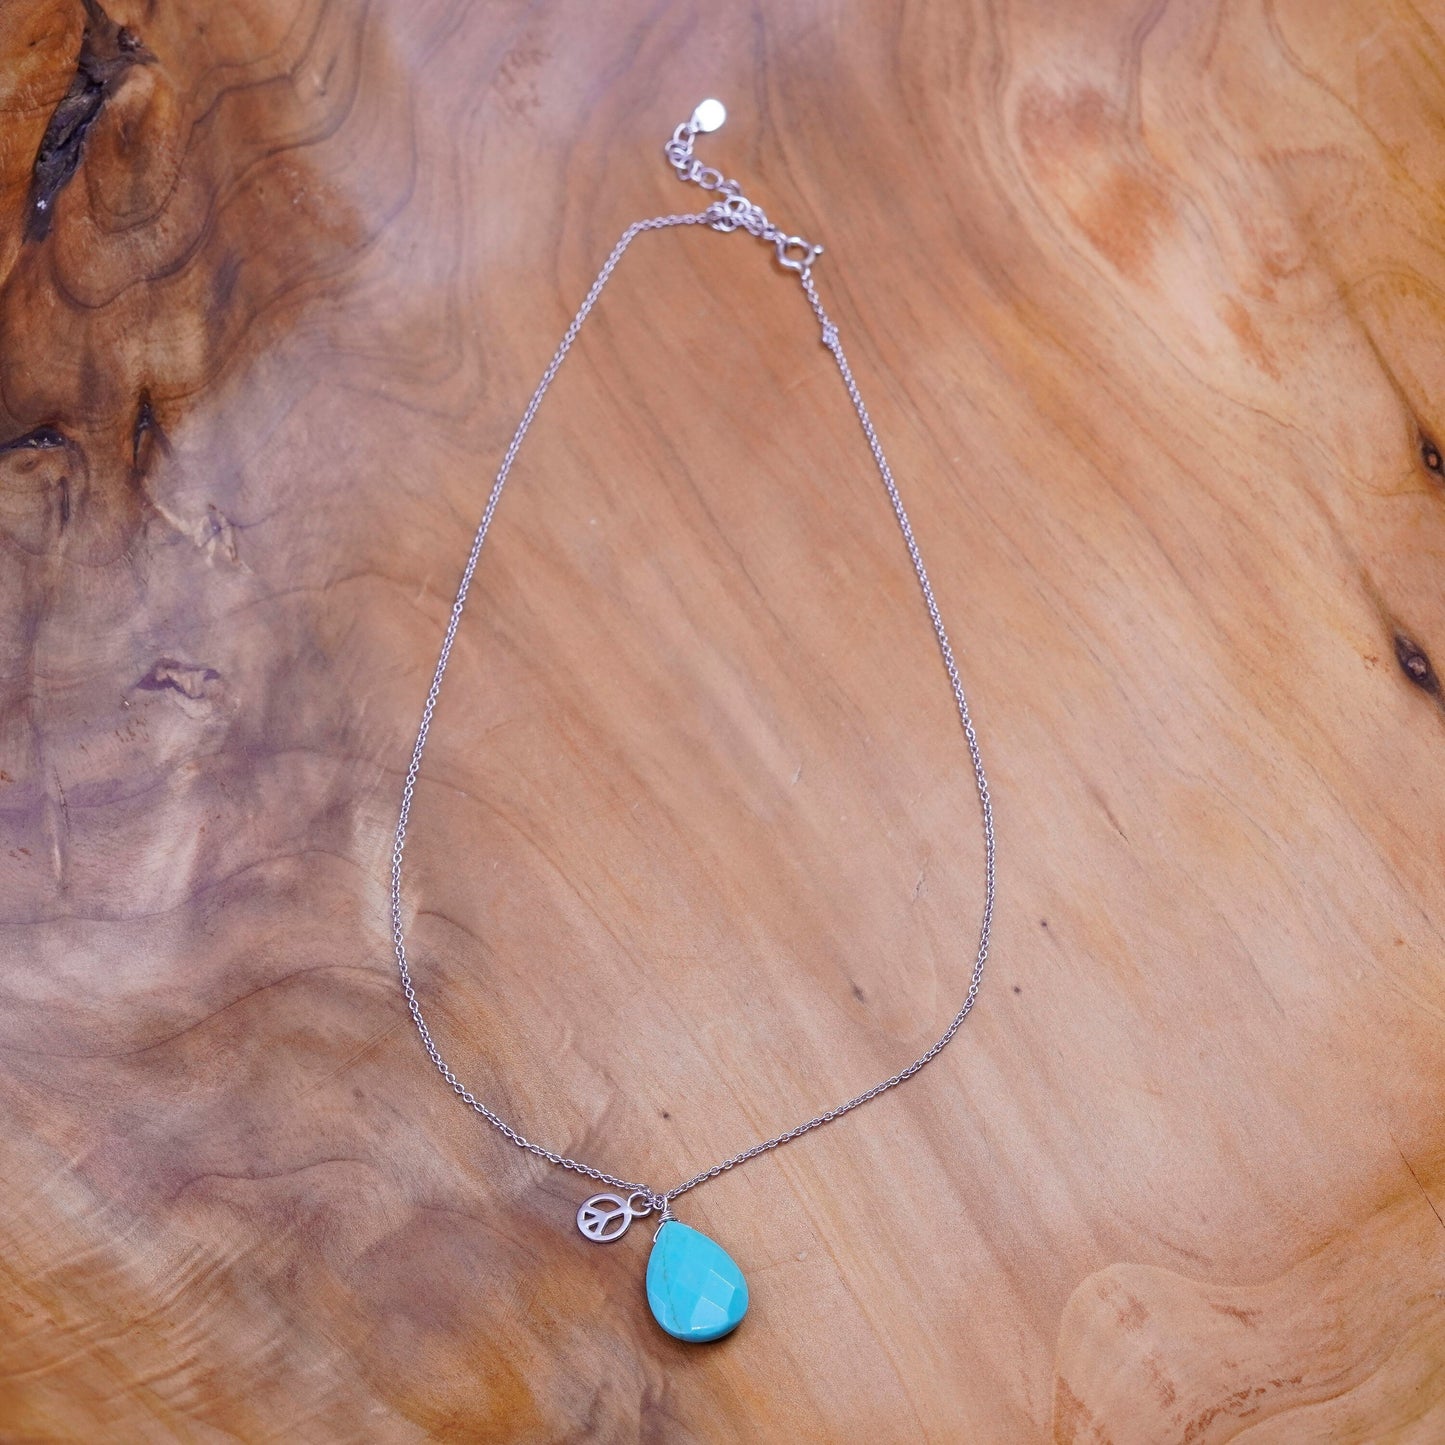 18”, sterling silver handmade necklace, 925 circle chain with turquoise pendant